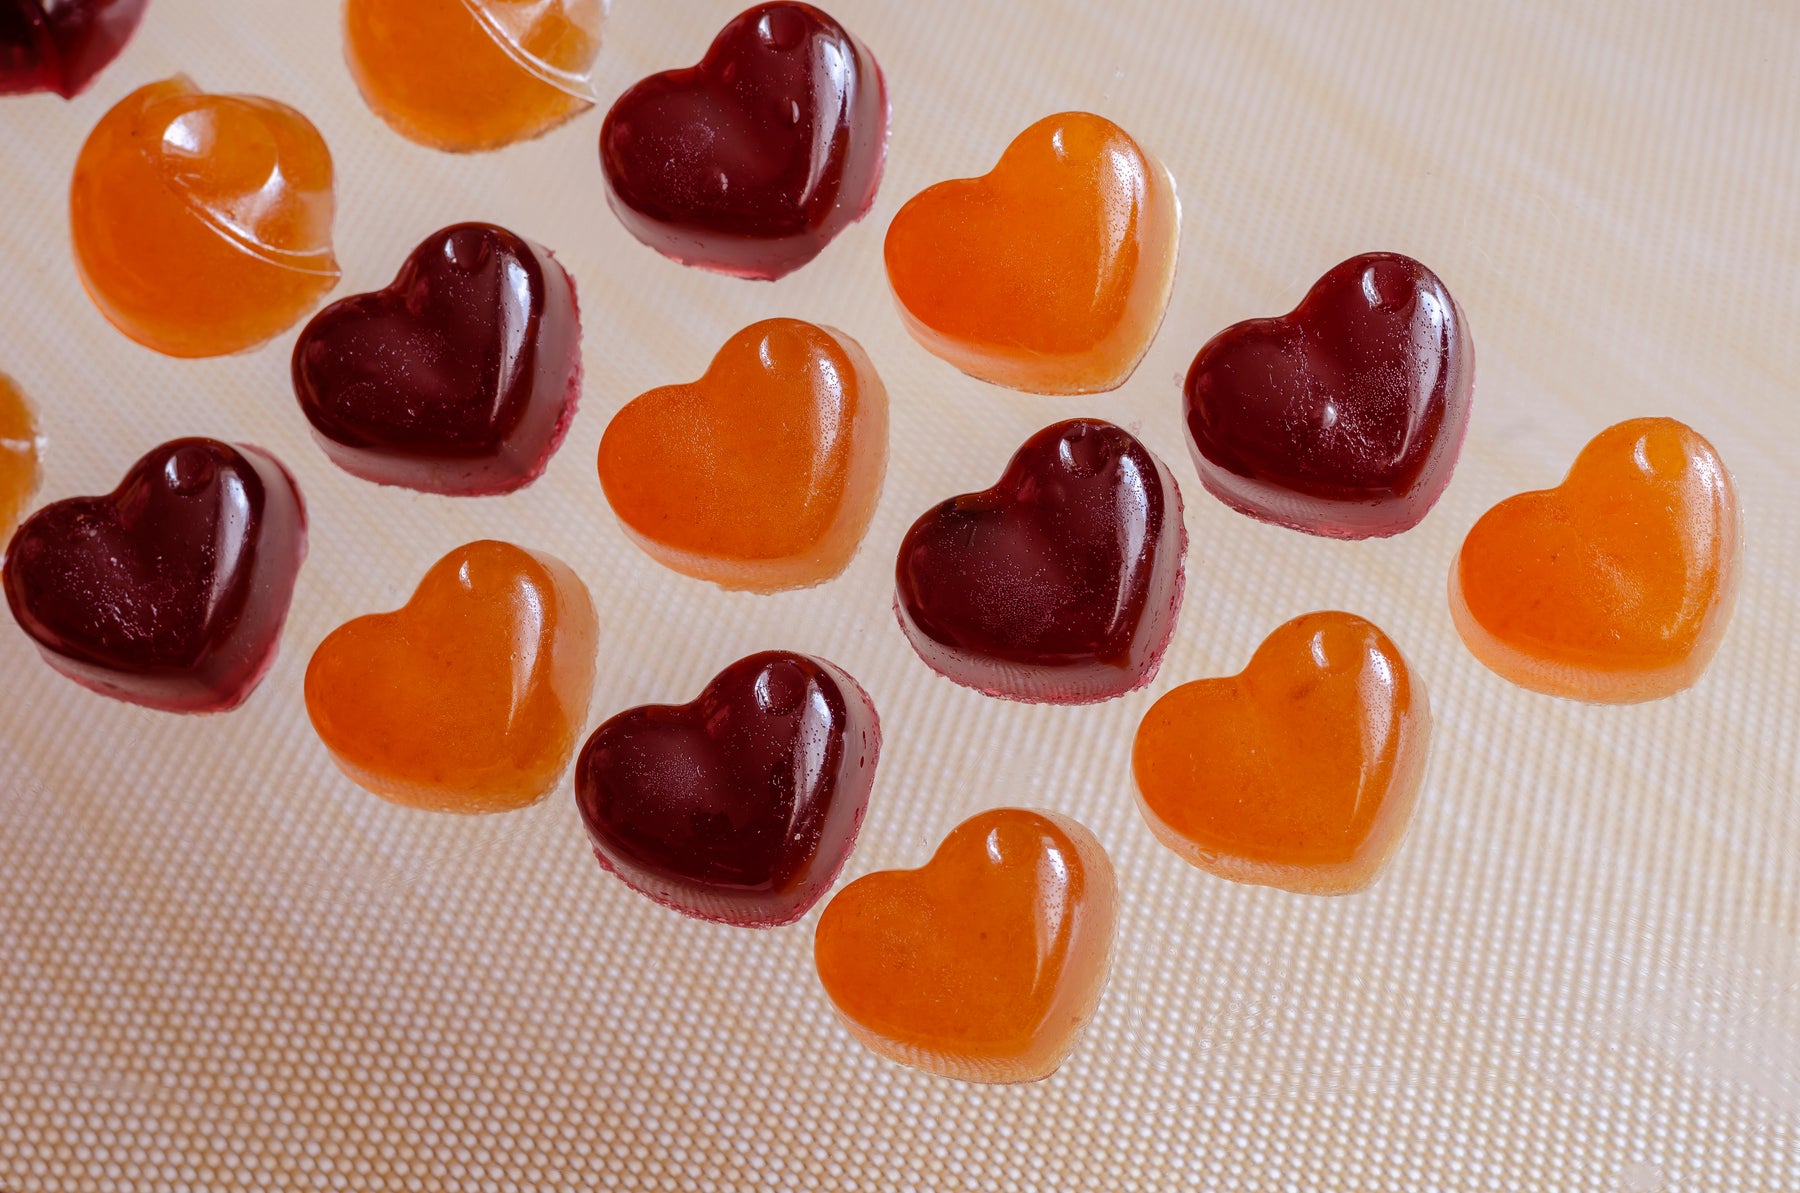 Loaded with ascorbic acid – a.k.a. vitamin C – our recipe provides all the benefits of this powerful antioxidant in tasty gelatin gummies your whole family will love.